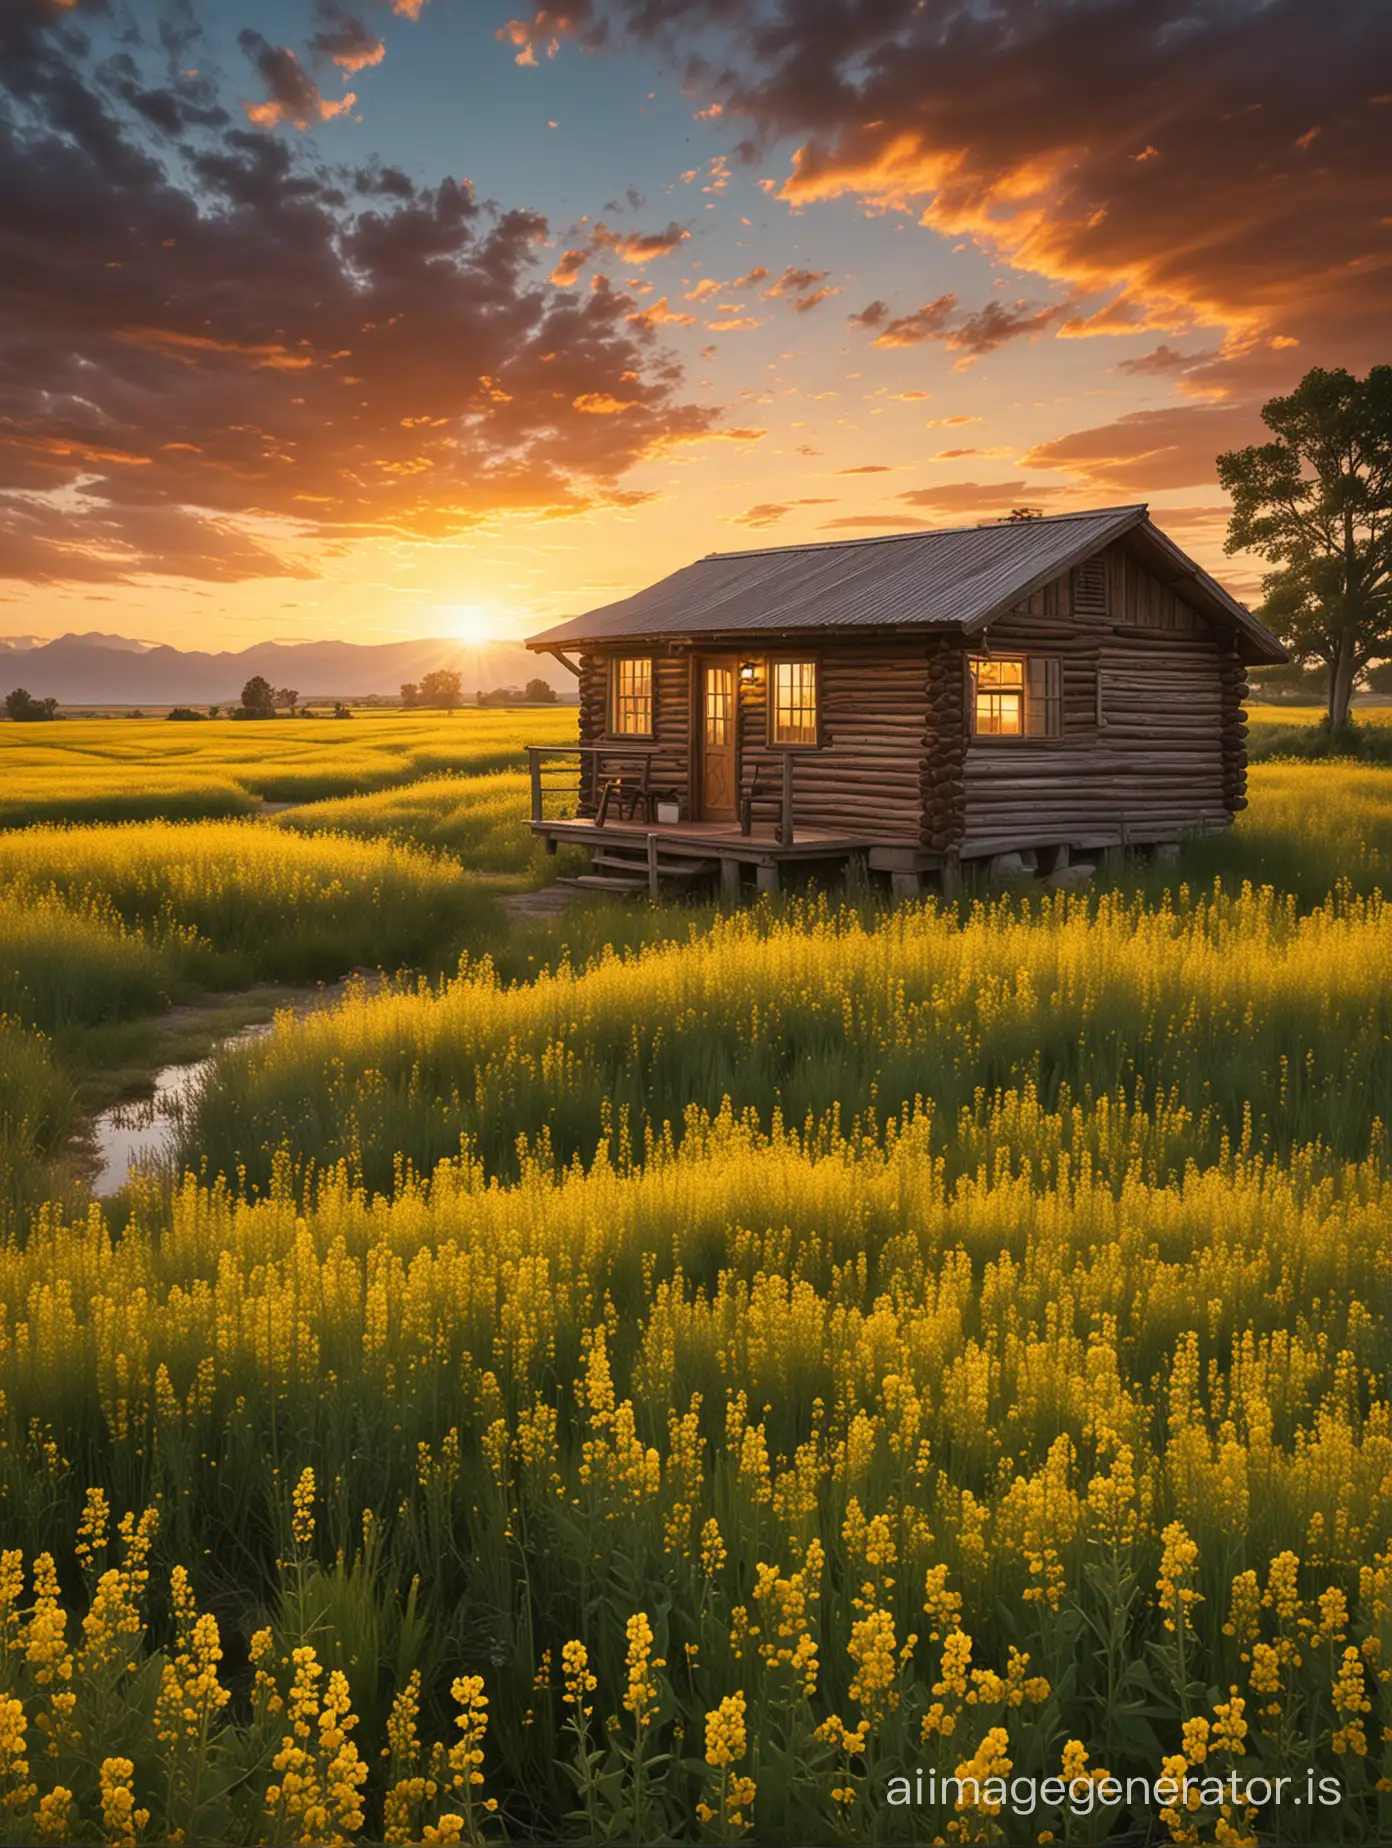 Tranquil-Cabin-Retreat-Surrounded-by-Golden-Canola-Blooms